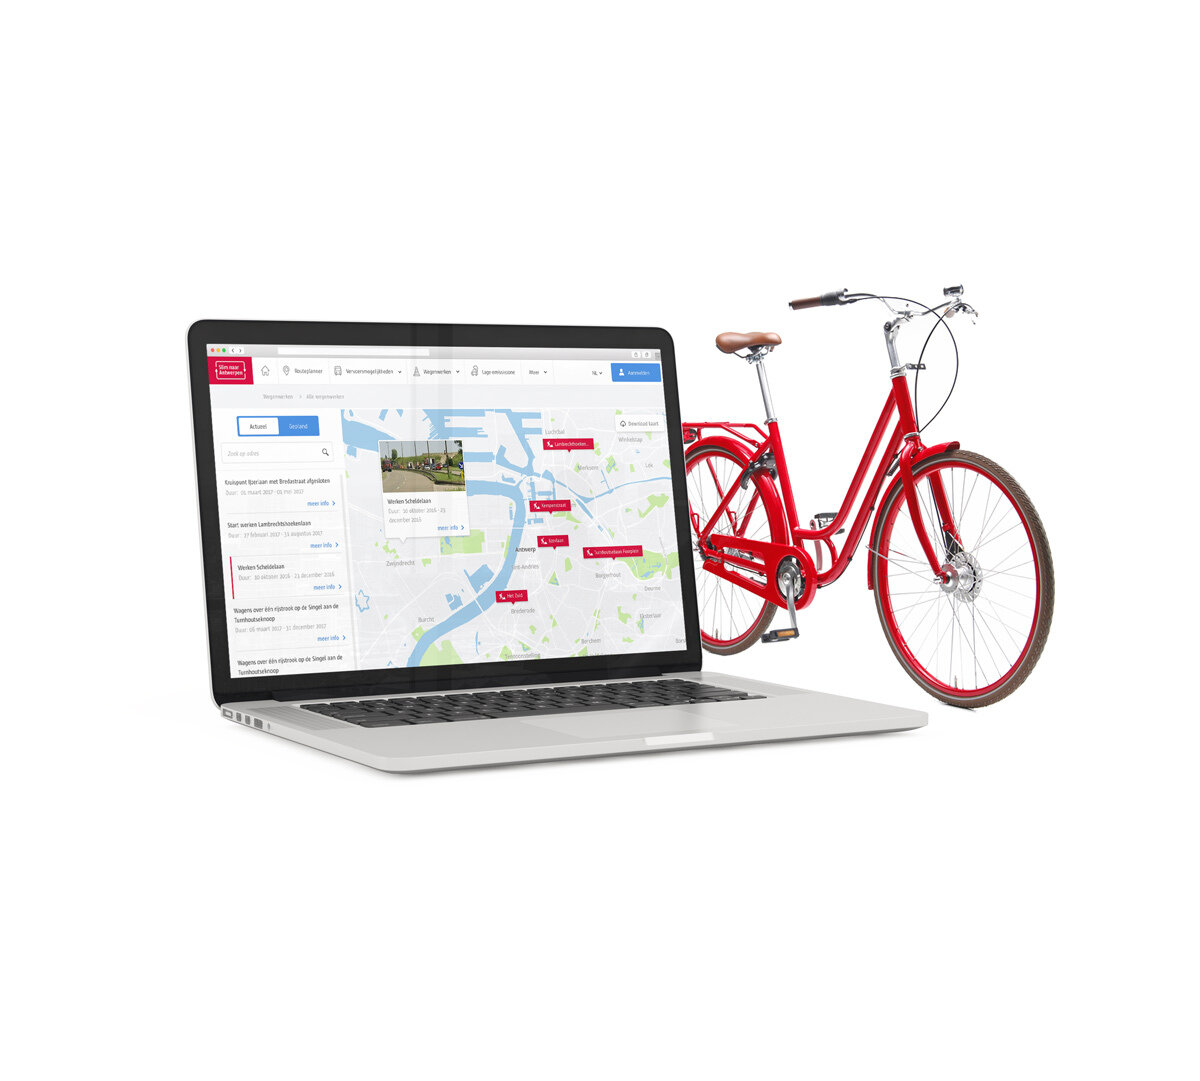 Laptop with the Smart to Antwerp website open. Next to the laptop stands a bicycle.